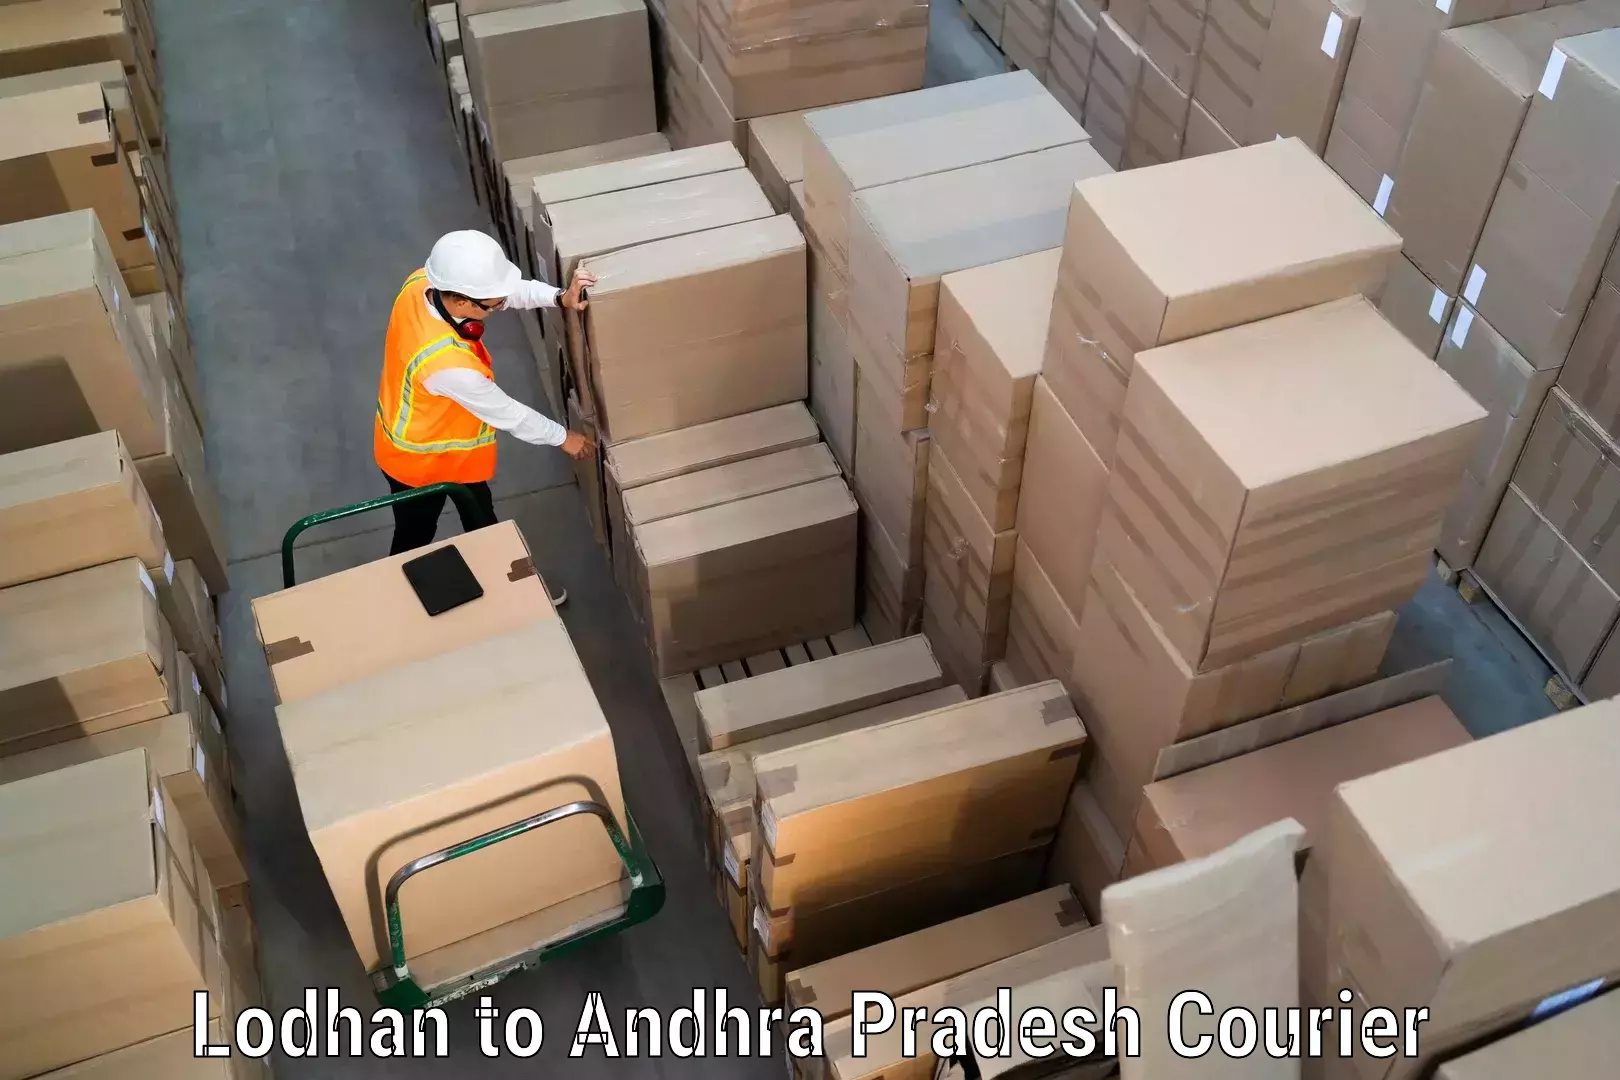 Full-service courier options in Lodhan to Kothapalli